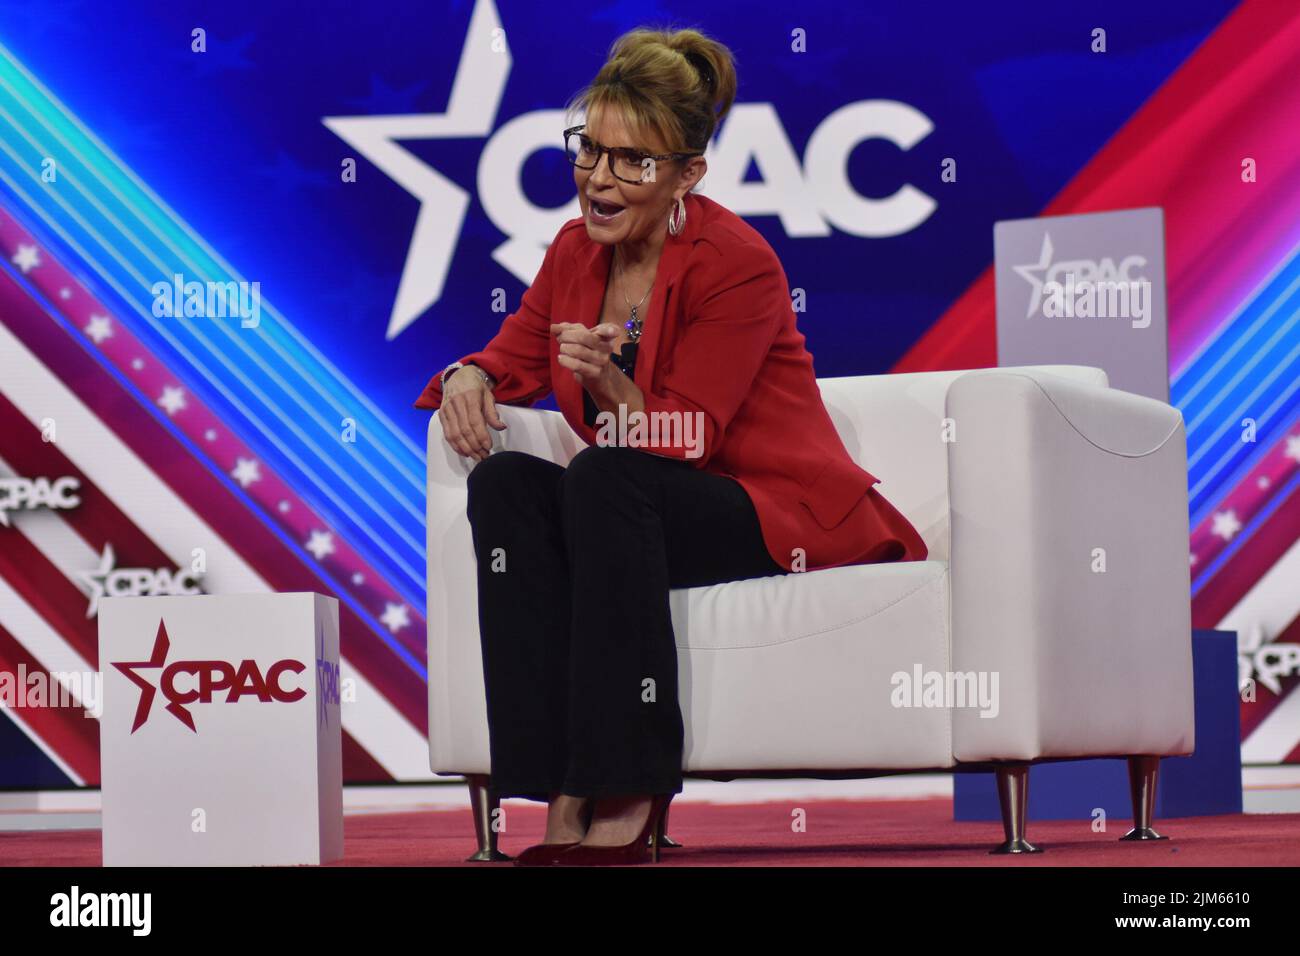 Dallas, Texas, USA. 4th Aug, 2022. (NEW) Sarah Palin delivers remarks at the Conservative Political Action Conference 2022 in Dallas, Texas. August 4, 2022, Dallas, TX, USA. Sarah Palin delivers remarks during the Conservative Political Action Conference (CPAC), held in the state of Texas, in United States, on Thursday (4). Sarah Palin is running for Congress to replace Representative Don Young, who died. Sarah Palin is a Former Governor of the State of Alaska. The conference is broadcast live on the CPAC website and online on Fox Nation. (Credit Image: © Kyle Mazza/TheNEWS2 via ZUMA Press Wi Stock Photo